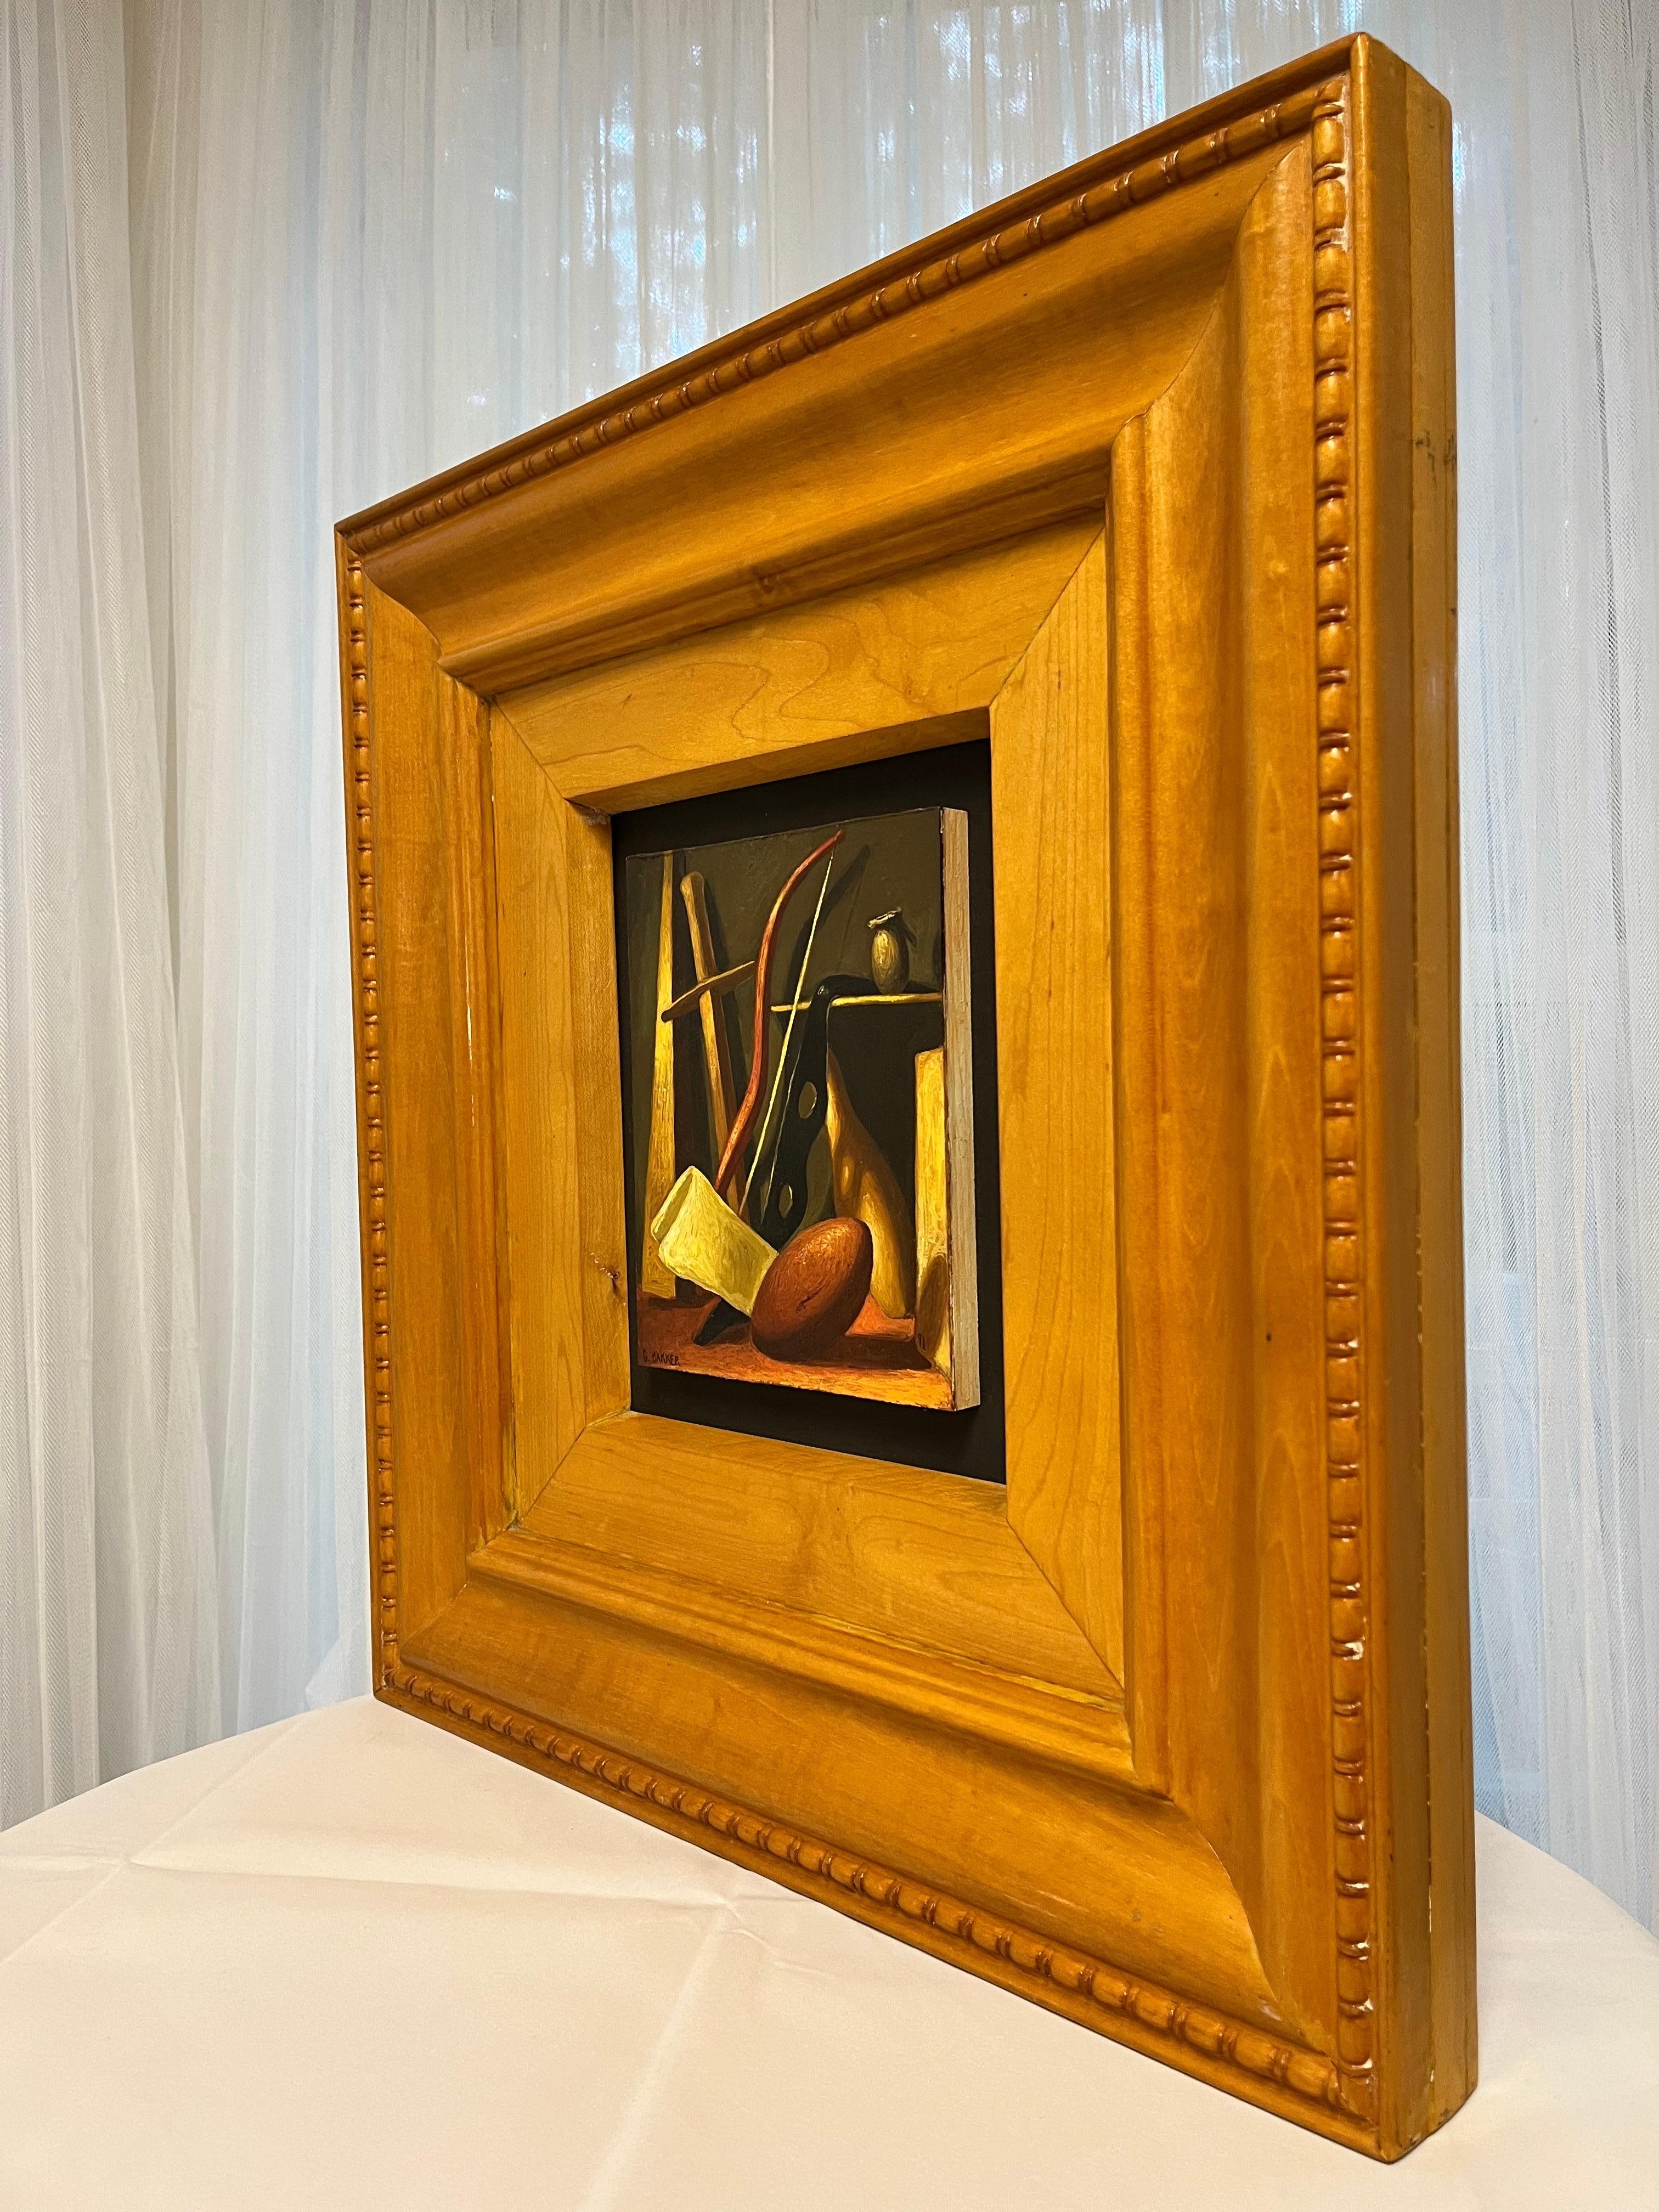 A contemporary / vintage surrealist style still life painting by American woman artist Gabrielle Bakker presented in a custom frame. From the Gabrielle Bakker website, 